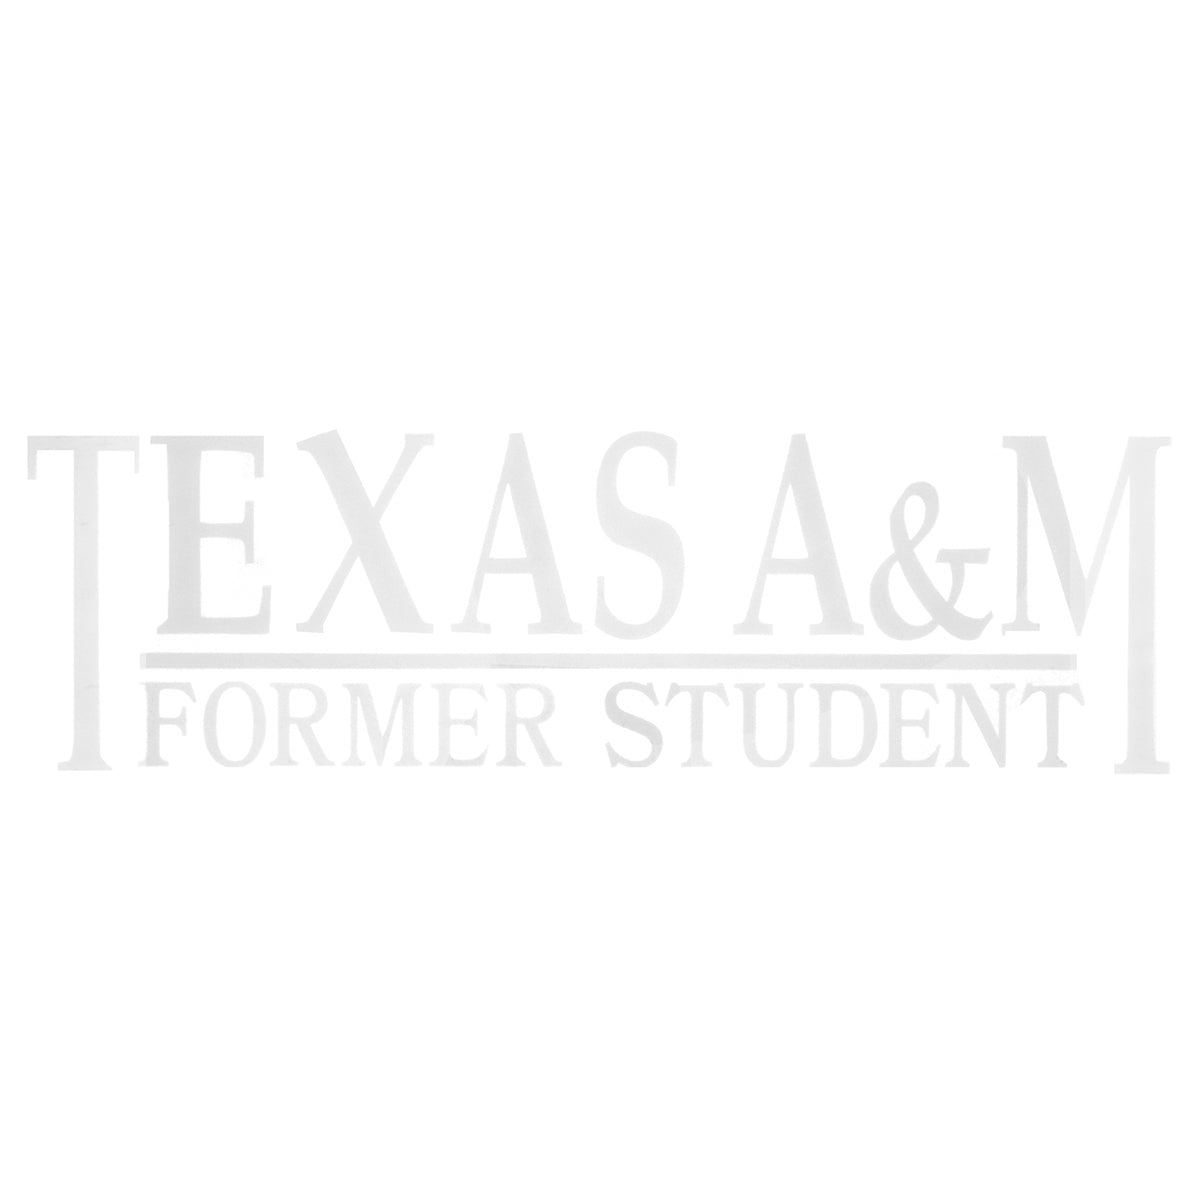 Texas A&M Former Student Decal